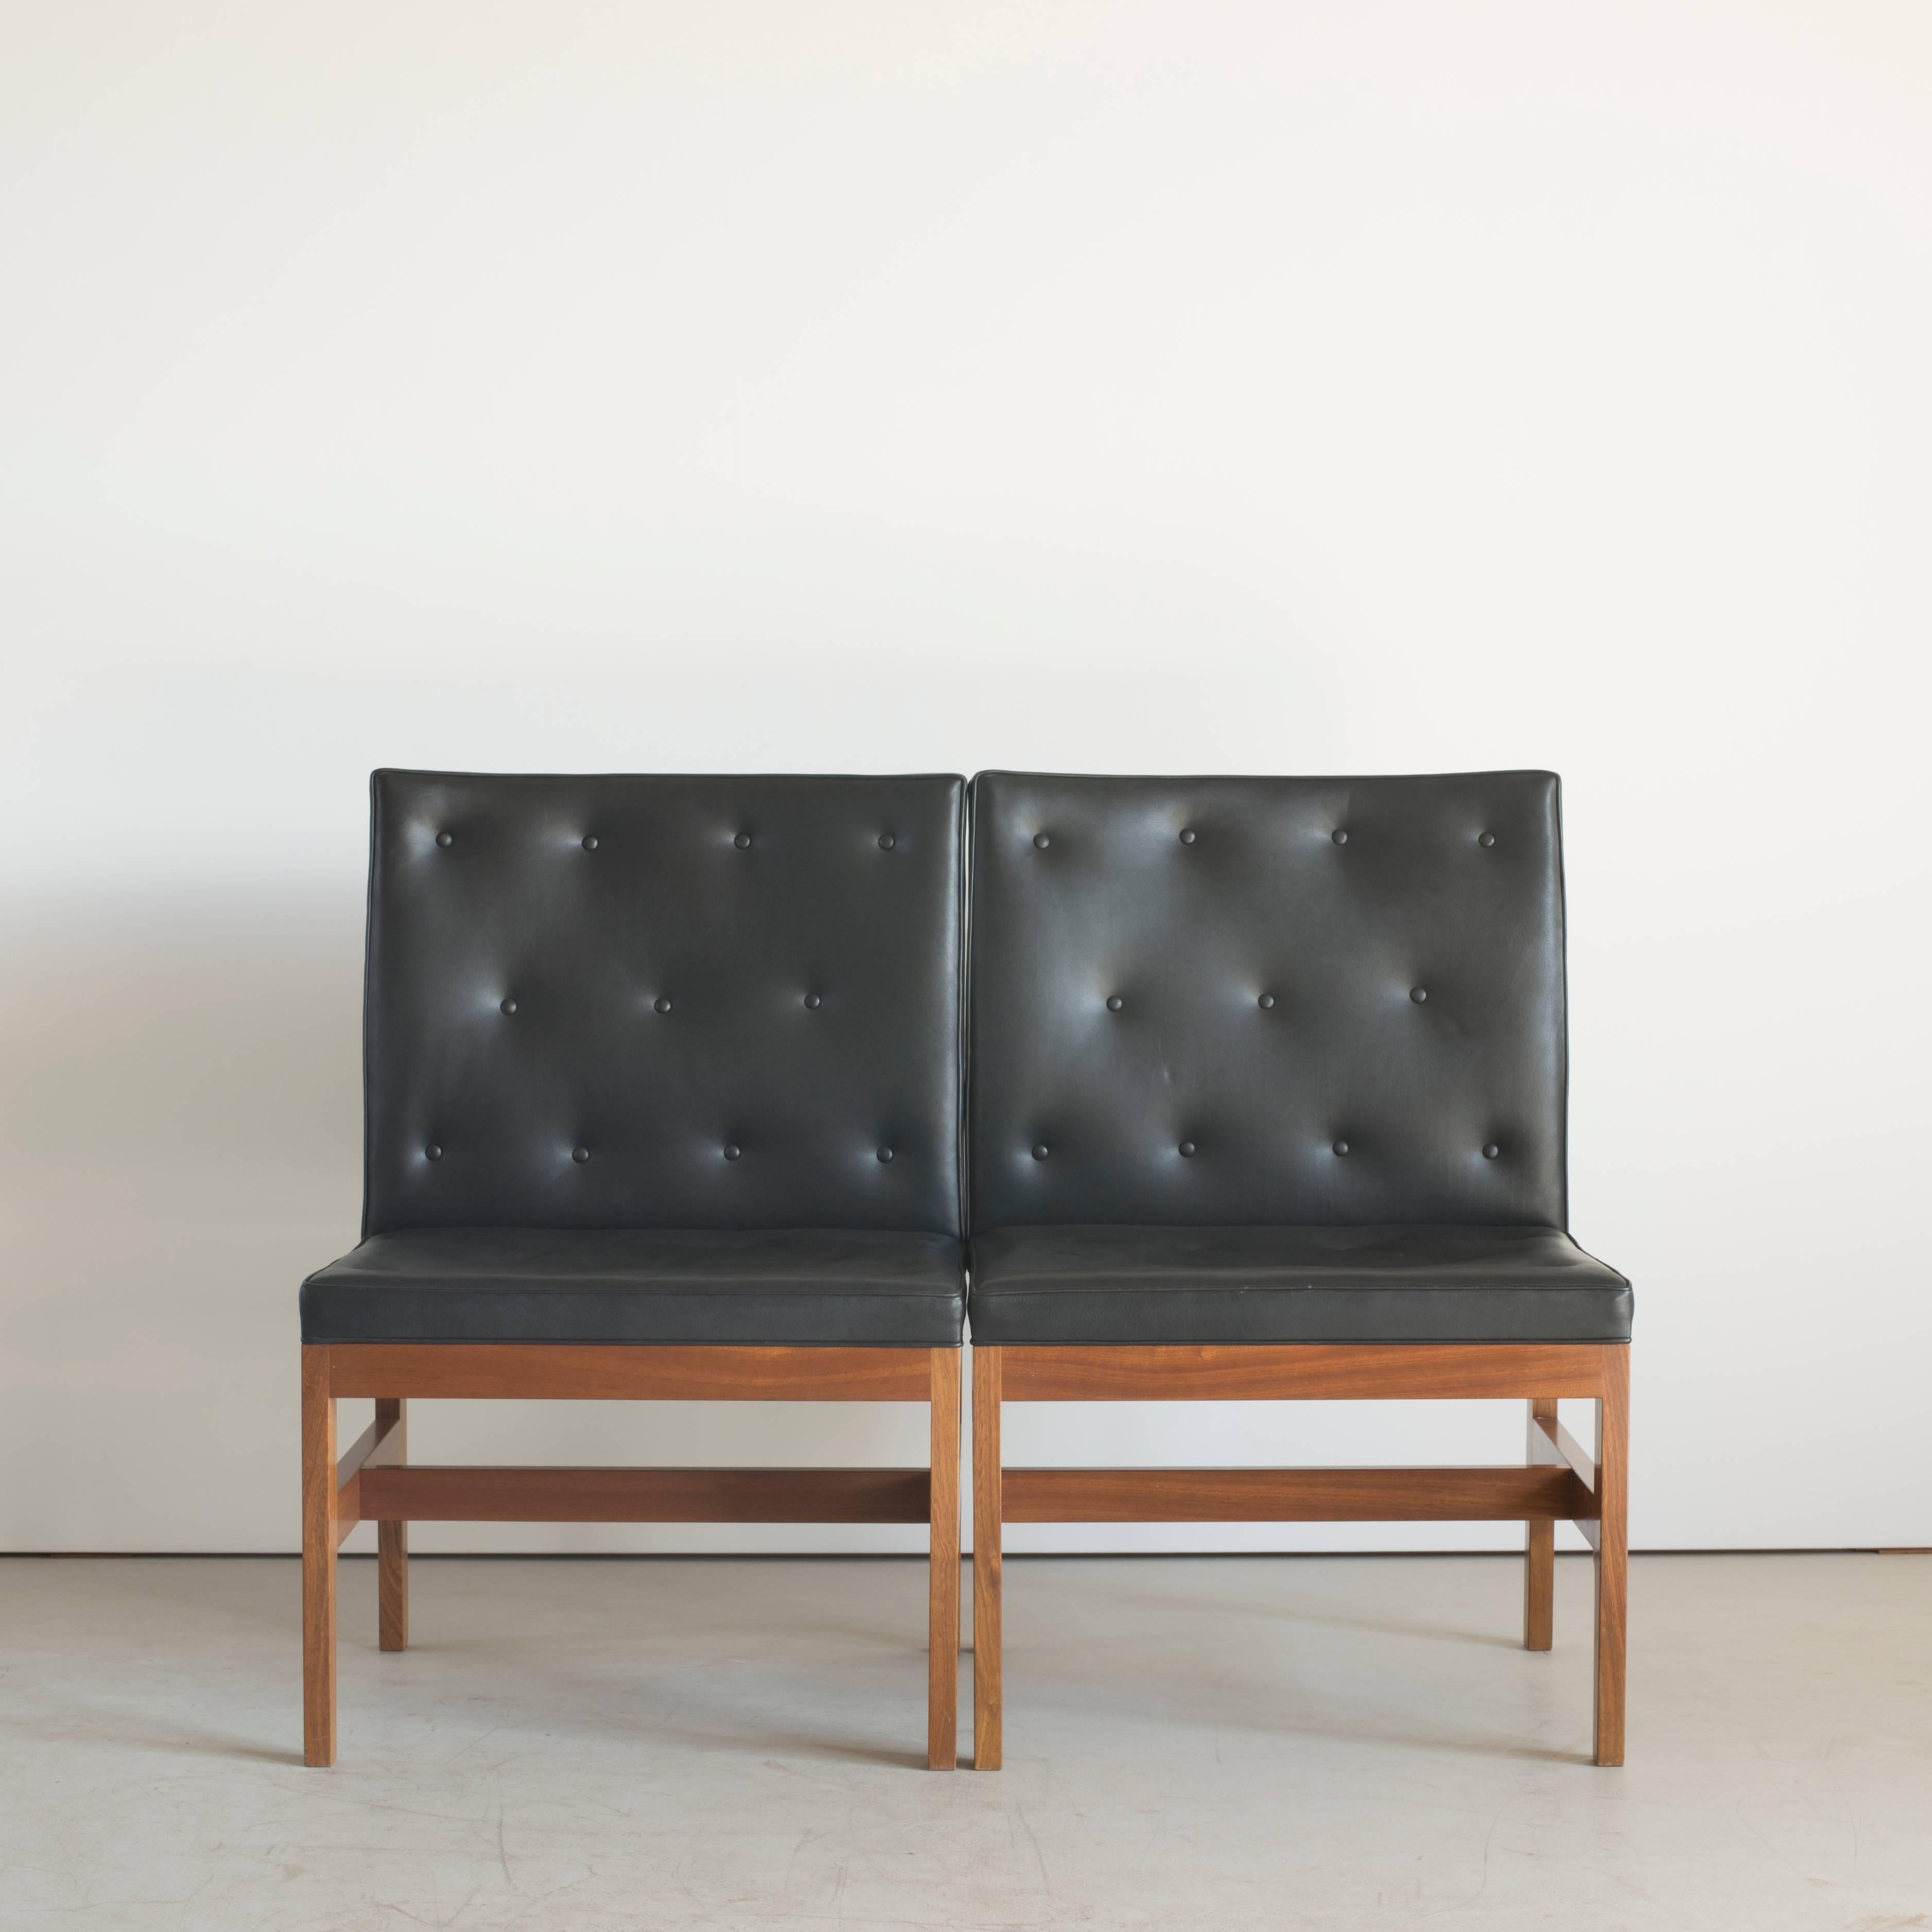 A pair of additional chairs by Mogens Koch. Executed by Rud. Rasmussen.

Mahogany and black leather. 

The reverse with paper labels ‘RUD. RASMUSSENS/SNEDKERIER/COPENHAGEN/DENMARK.